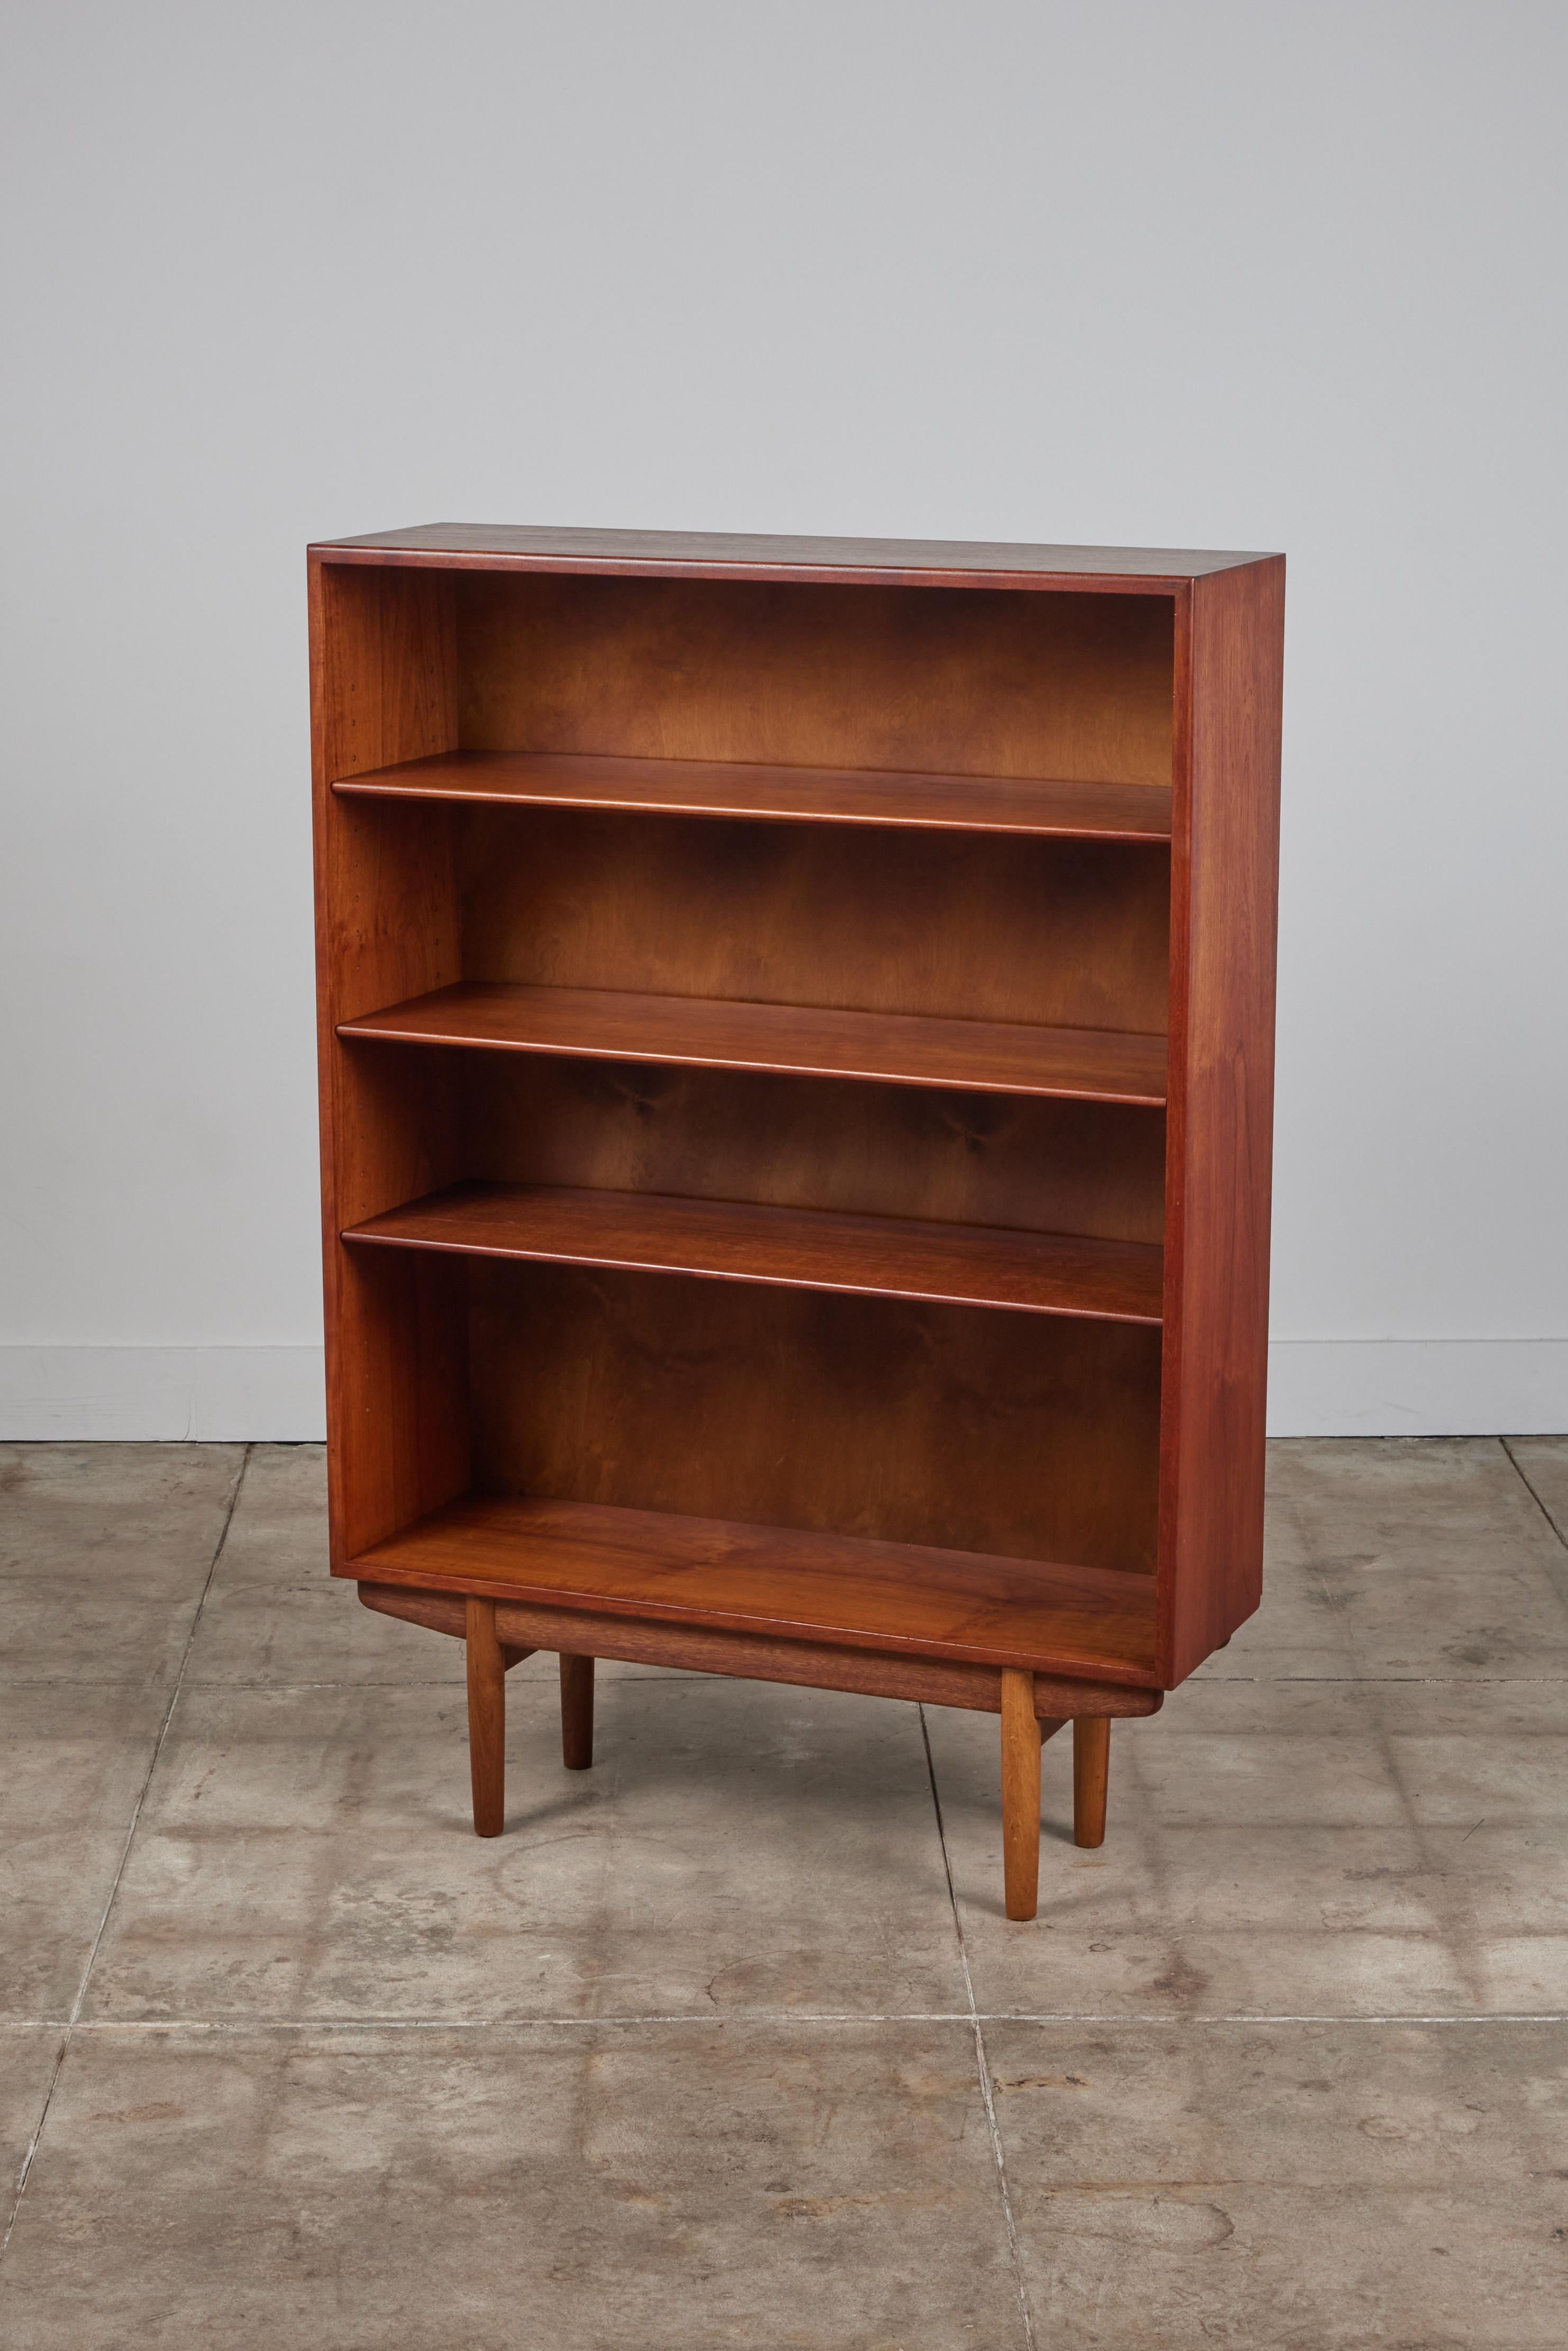 Børge Mogensen teak bookcase from Aalborg, Denmark, circa 1950s. The cabinet features a slender teak exterior frame and tapered turned legs. It has three adjustable shelves.

Dimensions
39.25